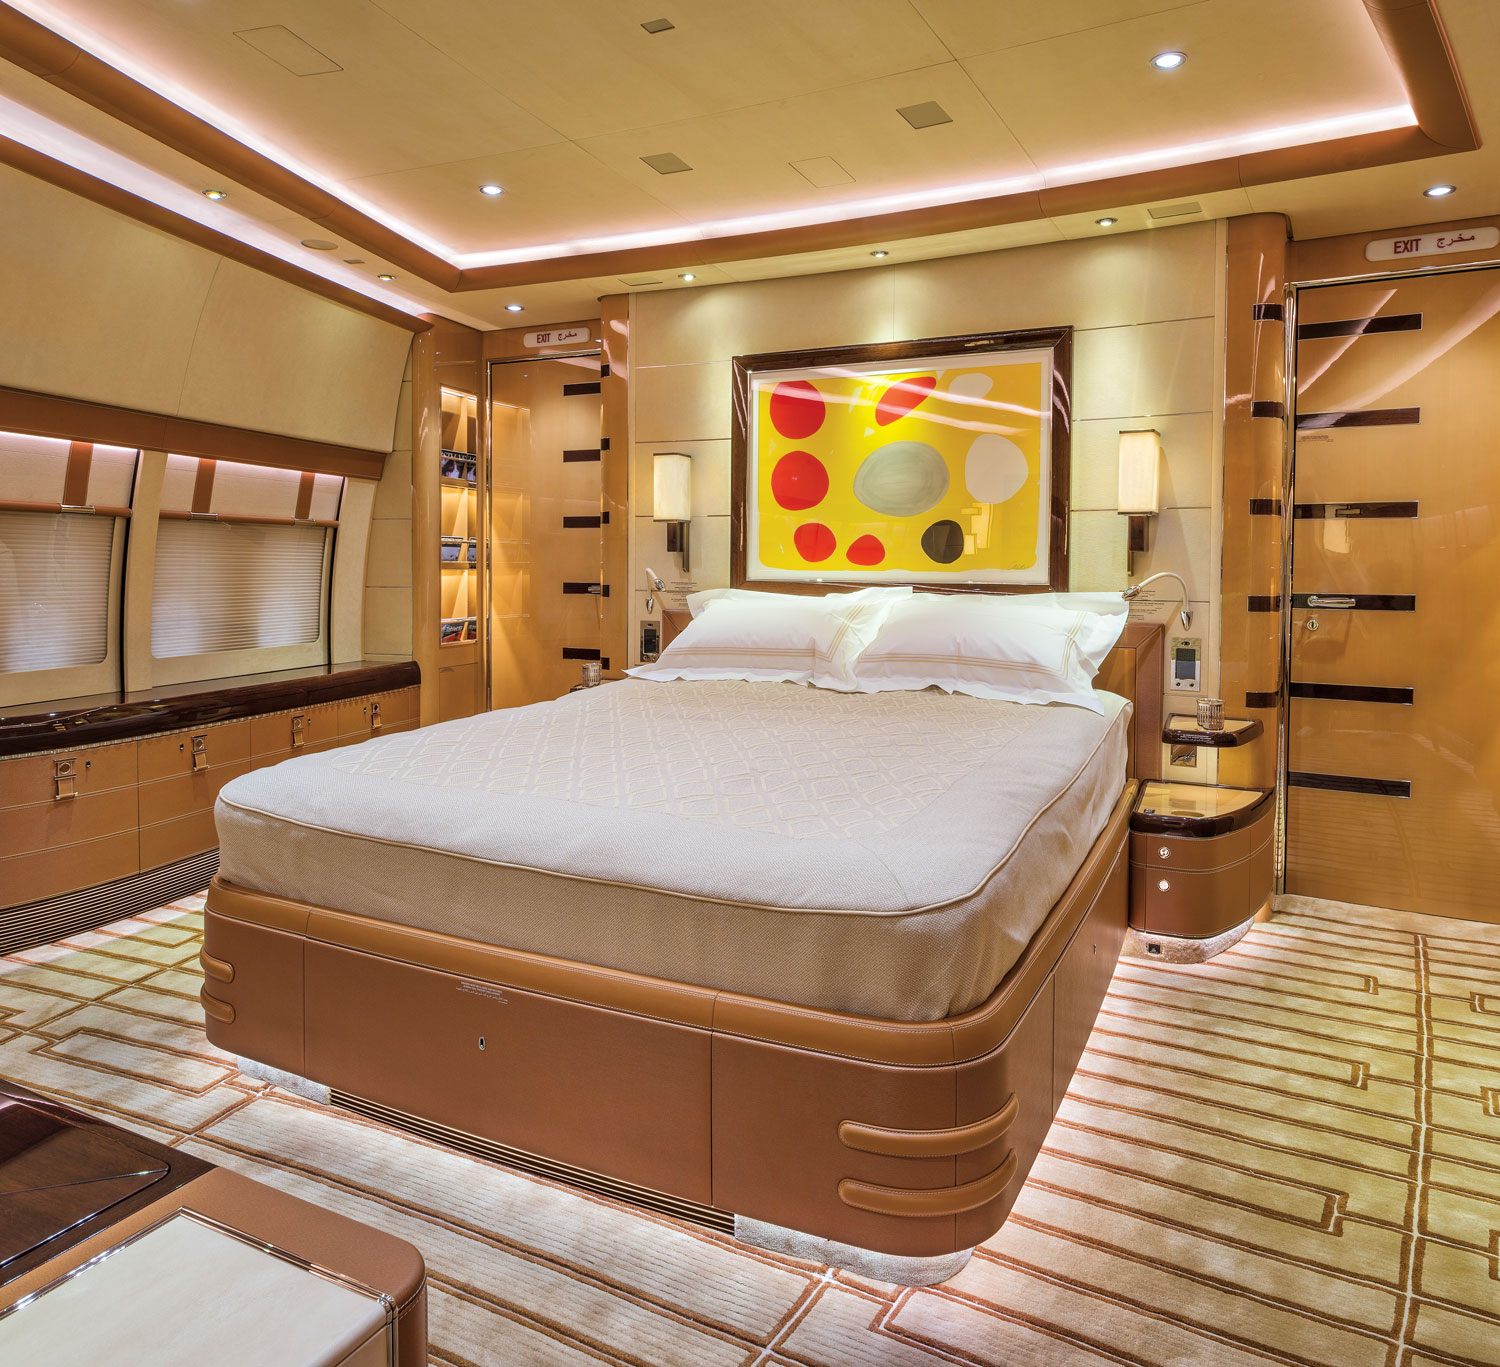 In the master bedroom of the private Boeing 747-8, an etching by Alexander Calder hangs above an Alberto Pinto-designed embossed leather bed with a saddle-stitch detail.